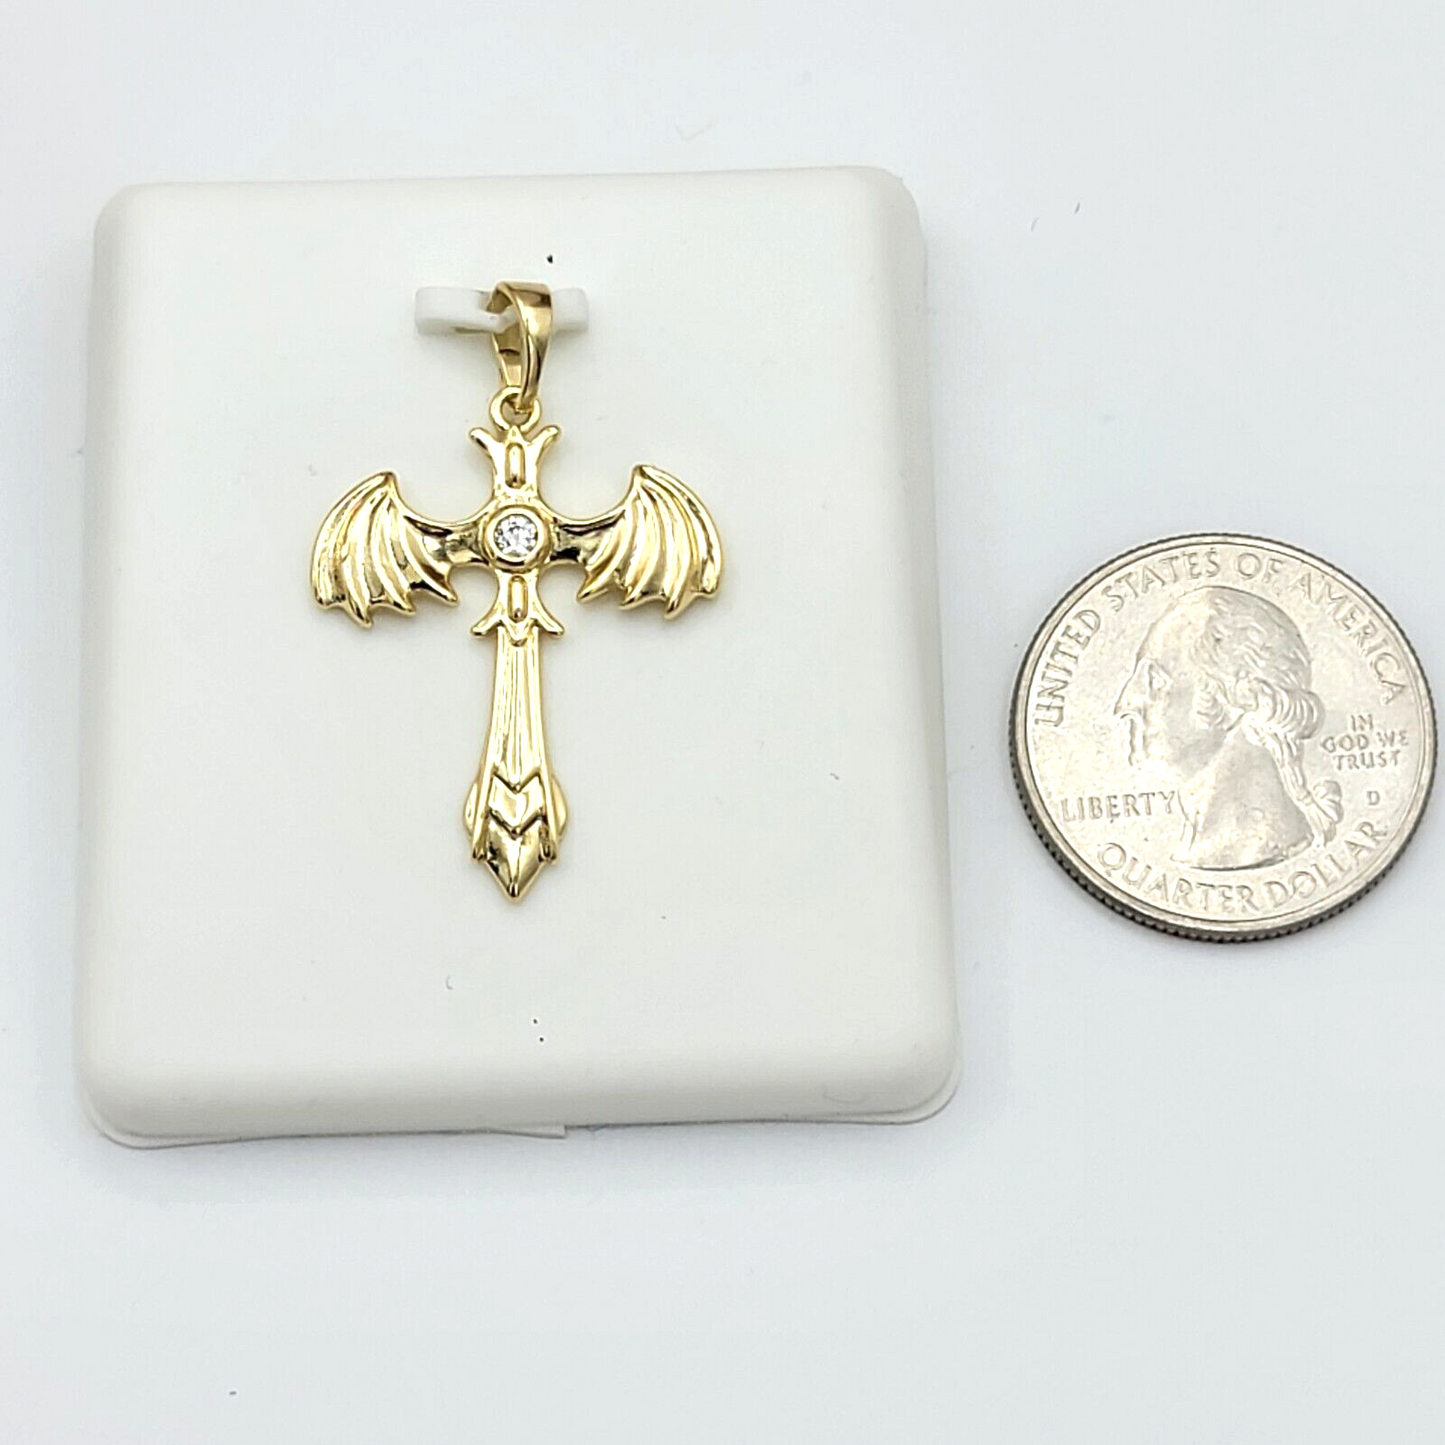 Necklaces - 14K Gold Plated. Cross with Wings Heart Angel Pendant & Chain.